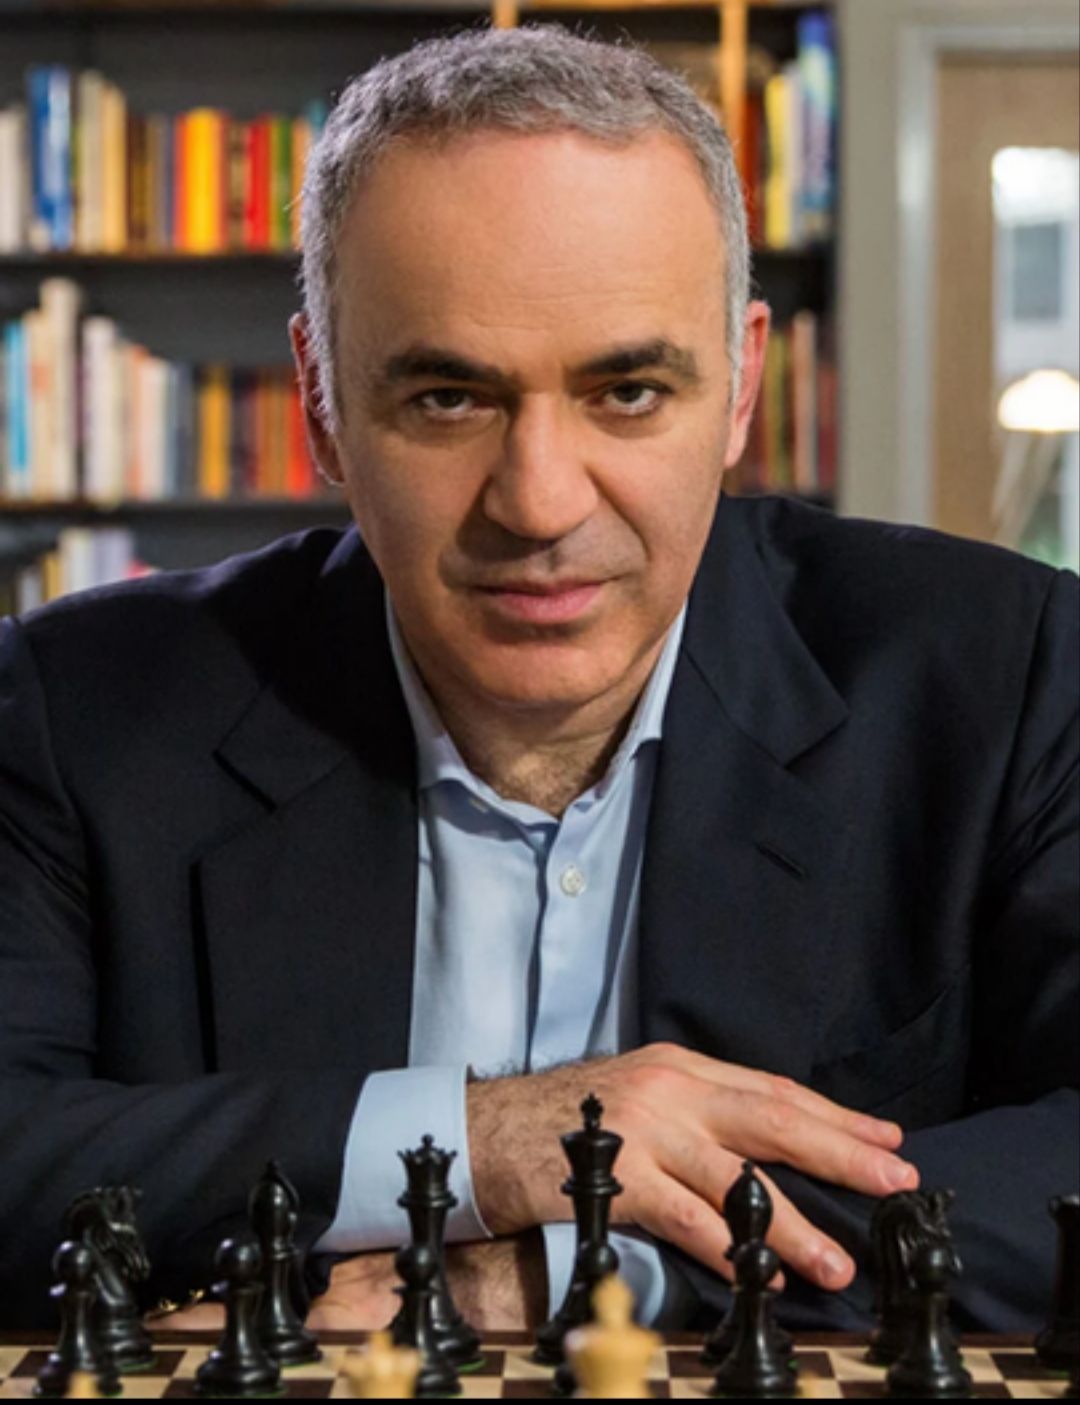 5 Best Chess Player Of All Time 